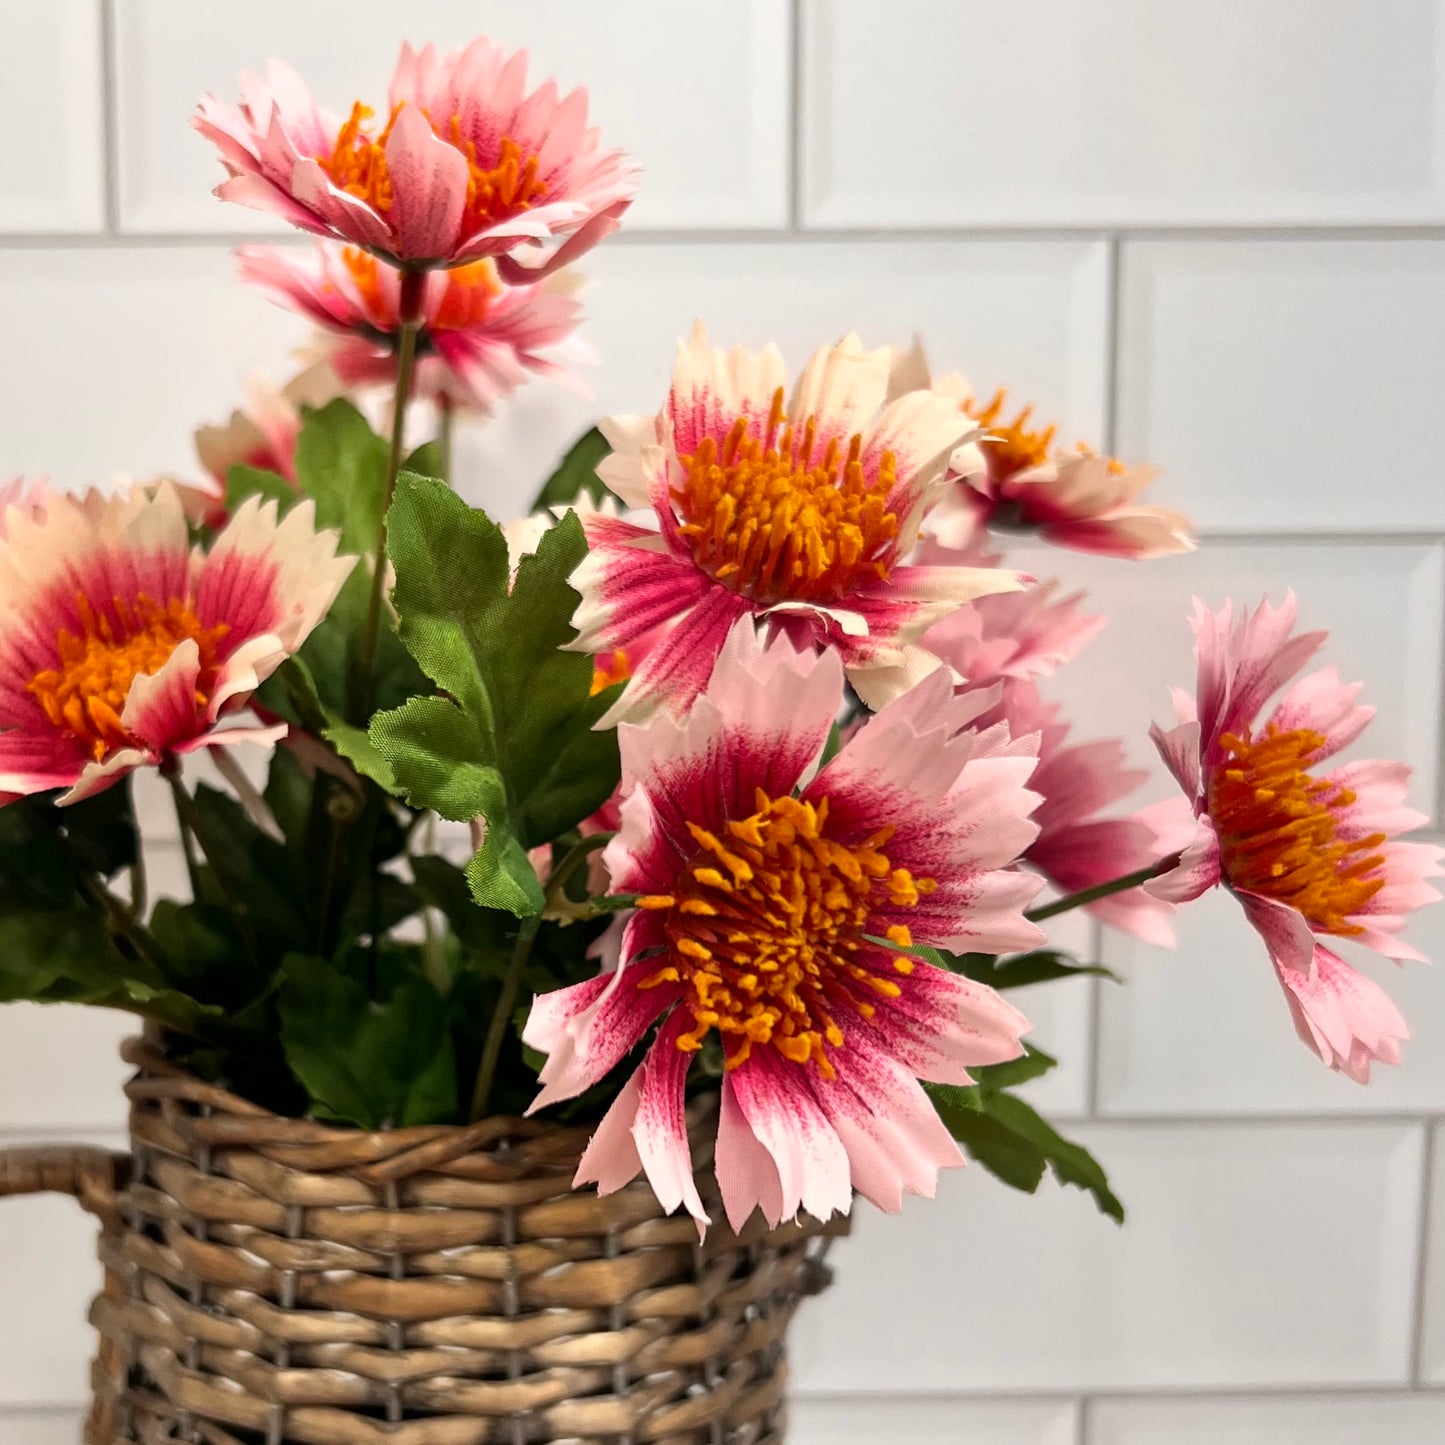 flower bunch in a woven vase with a subway tile background.